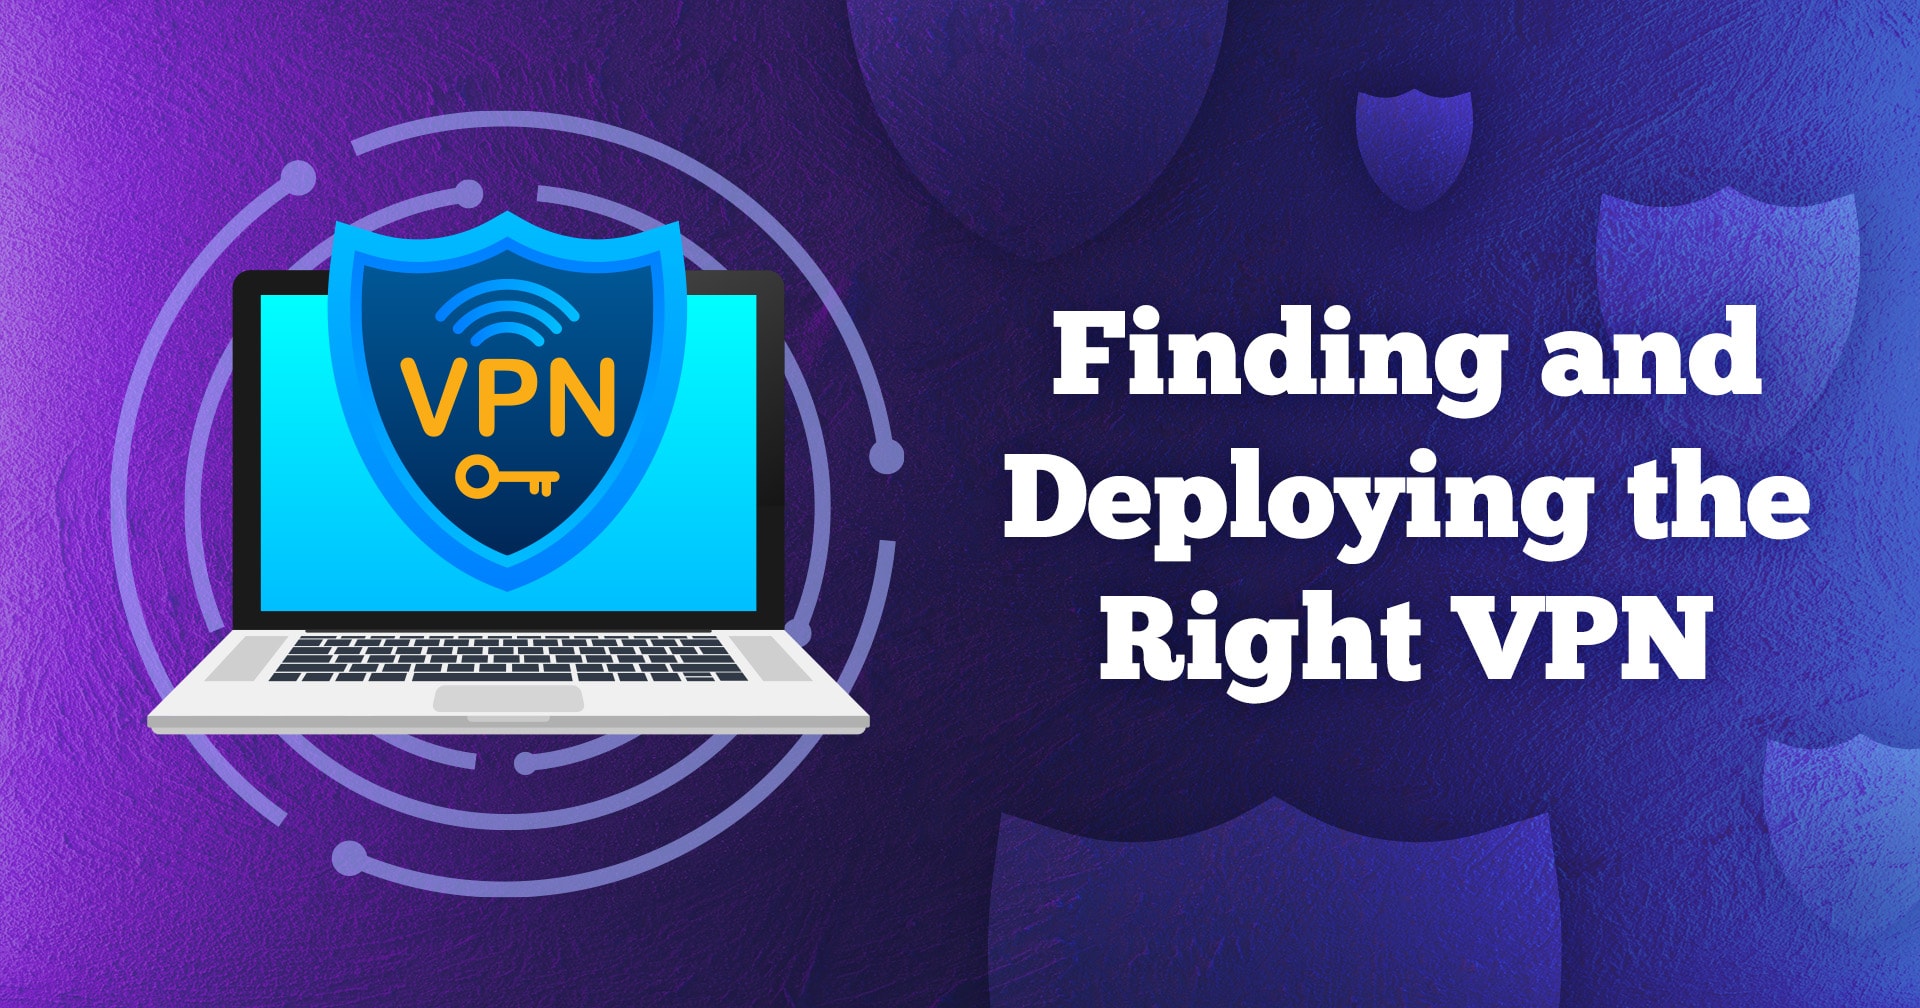 Finding-and-Deploying-the-Right-VPN-text